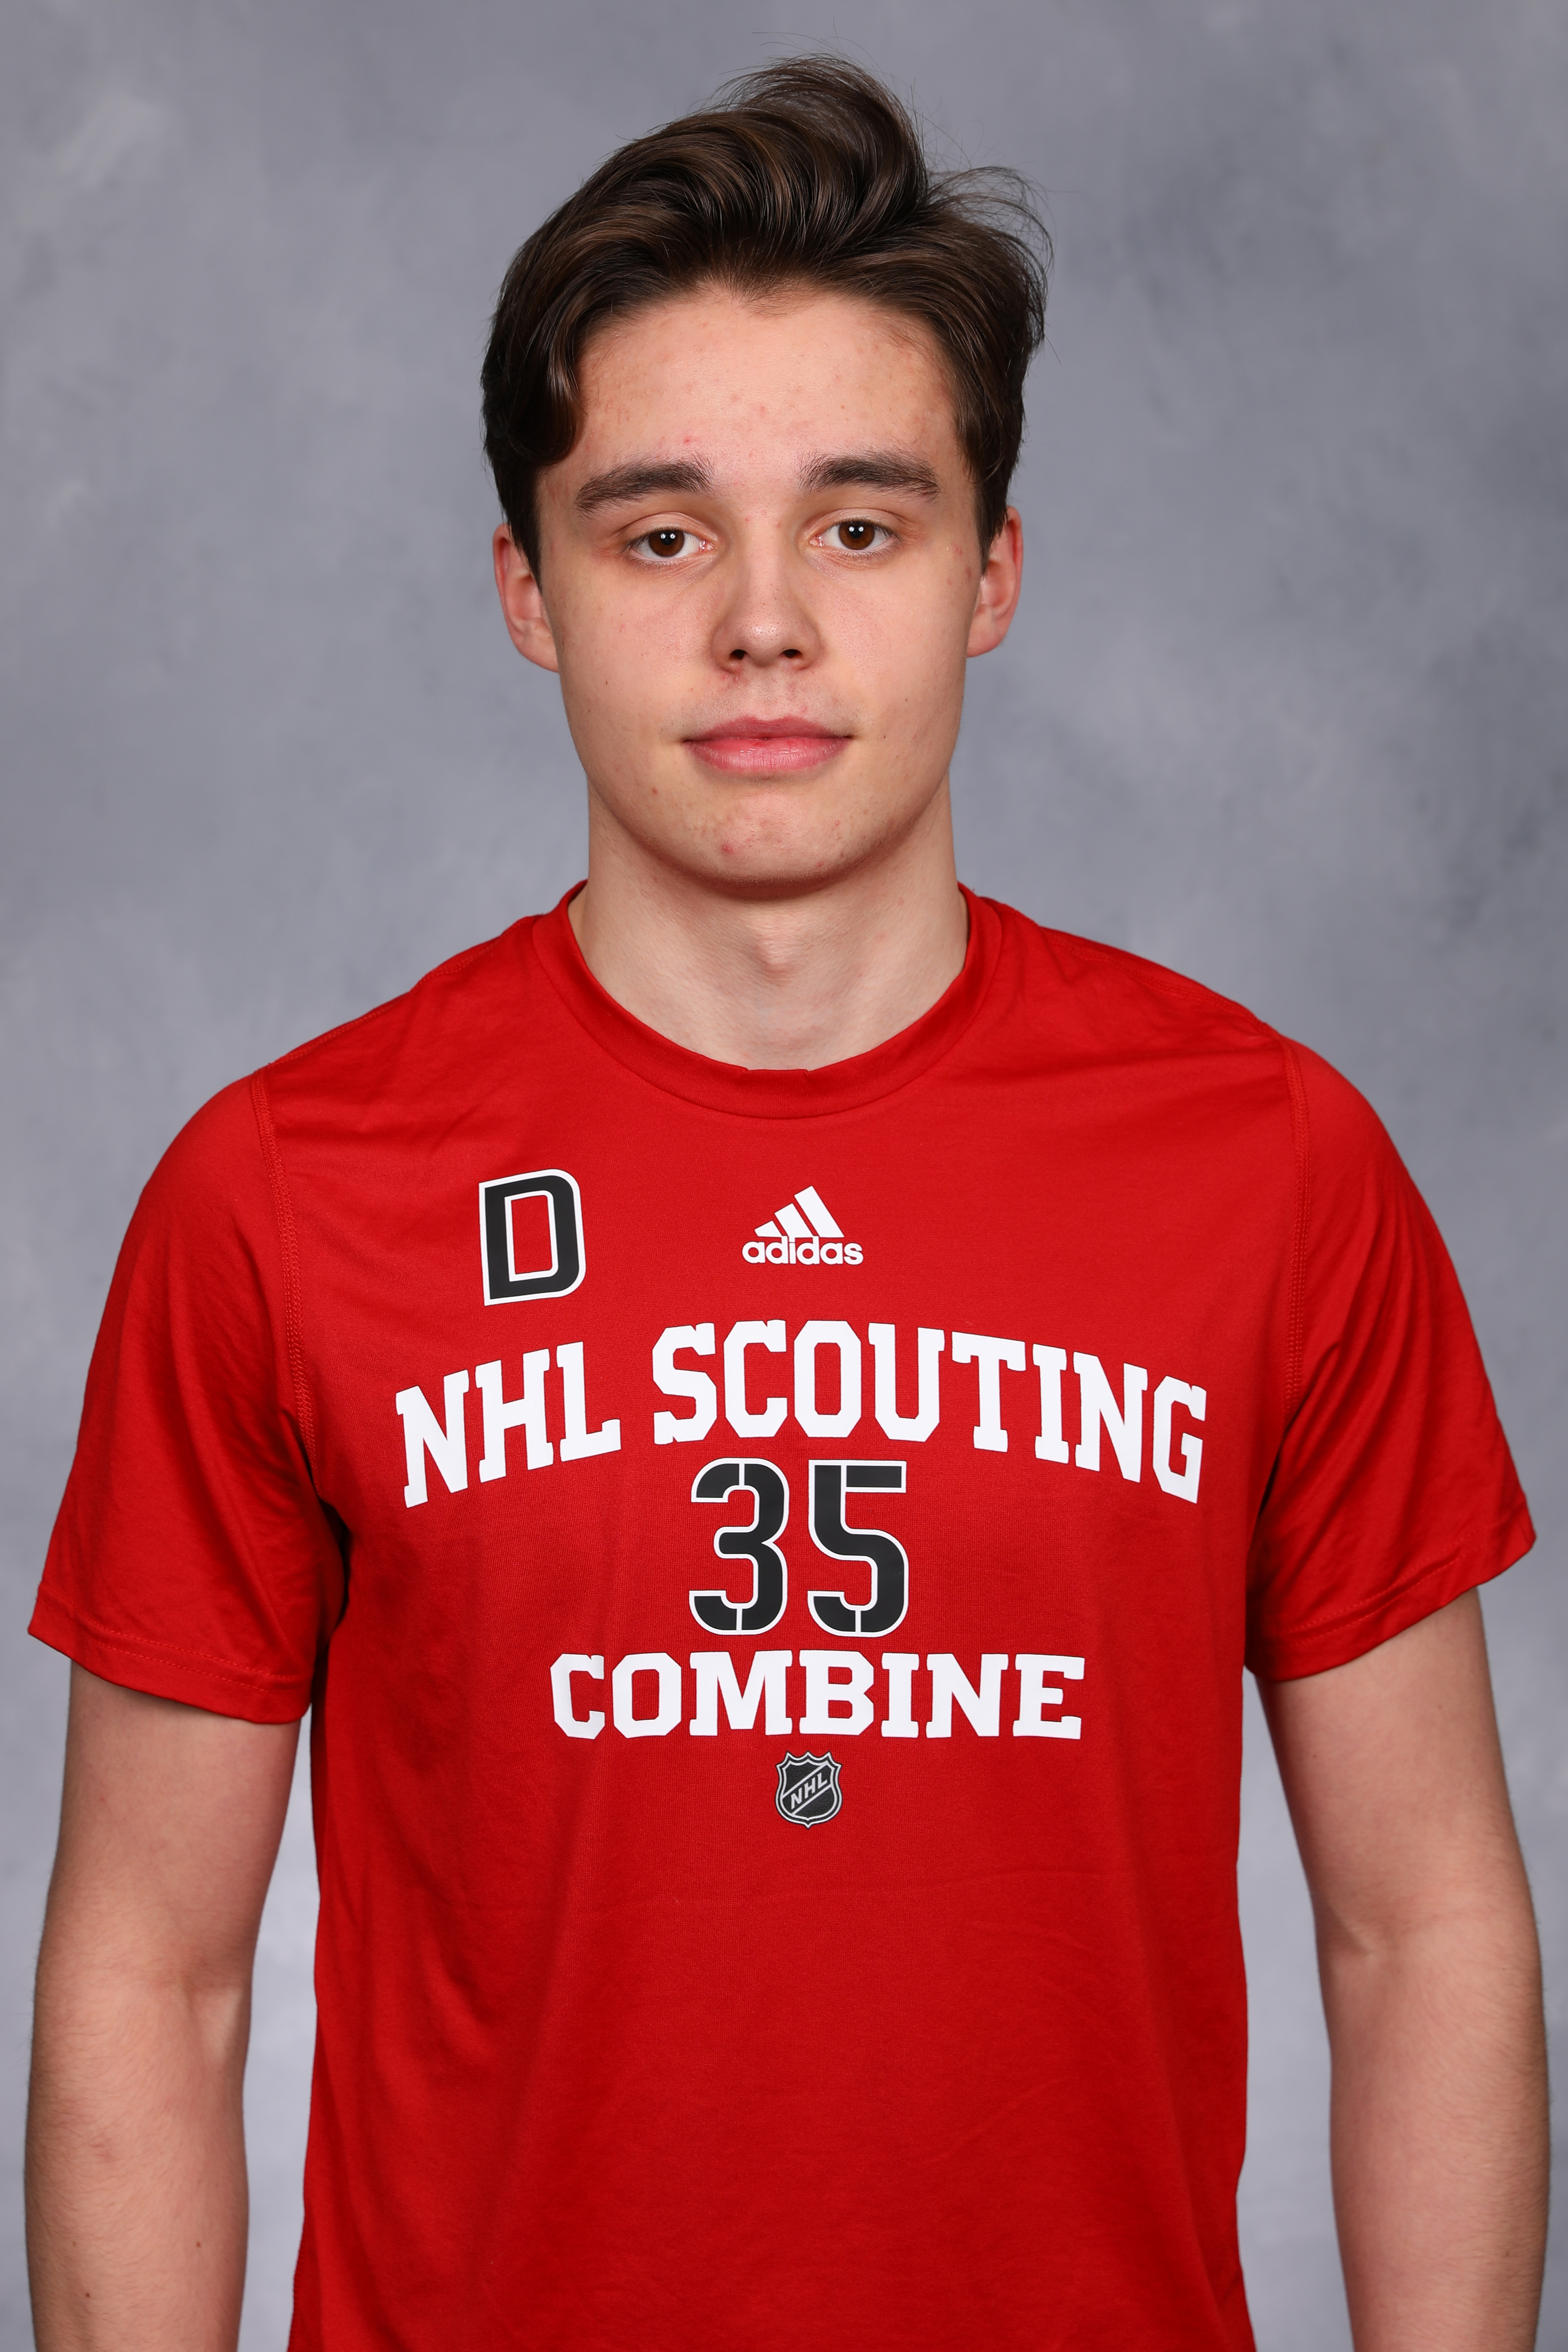 2022 NHL Scouting Combine